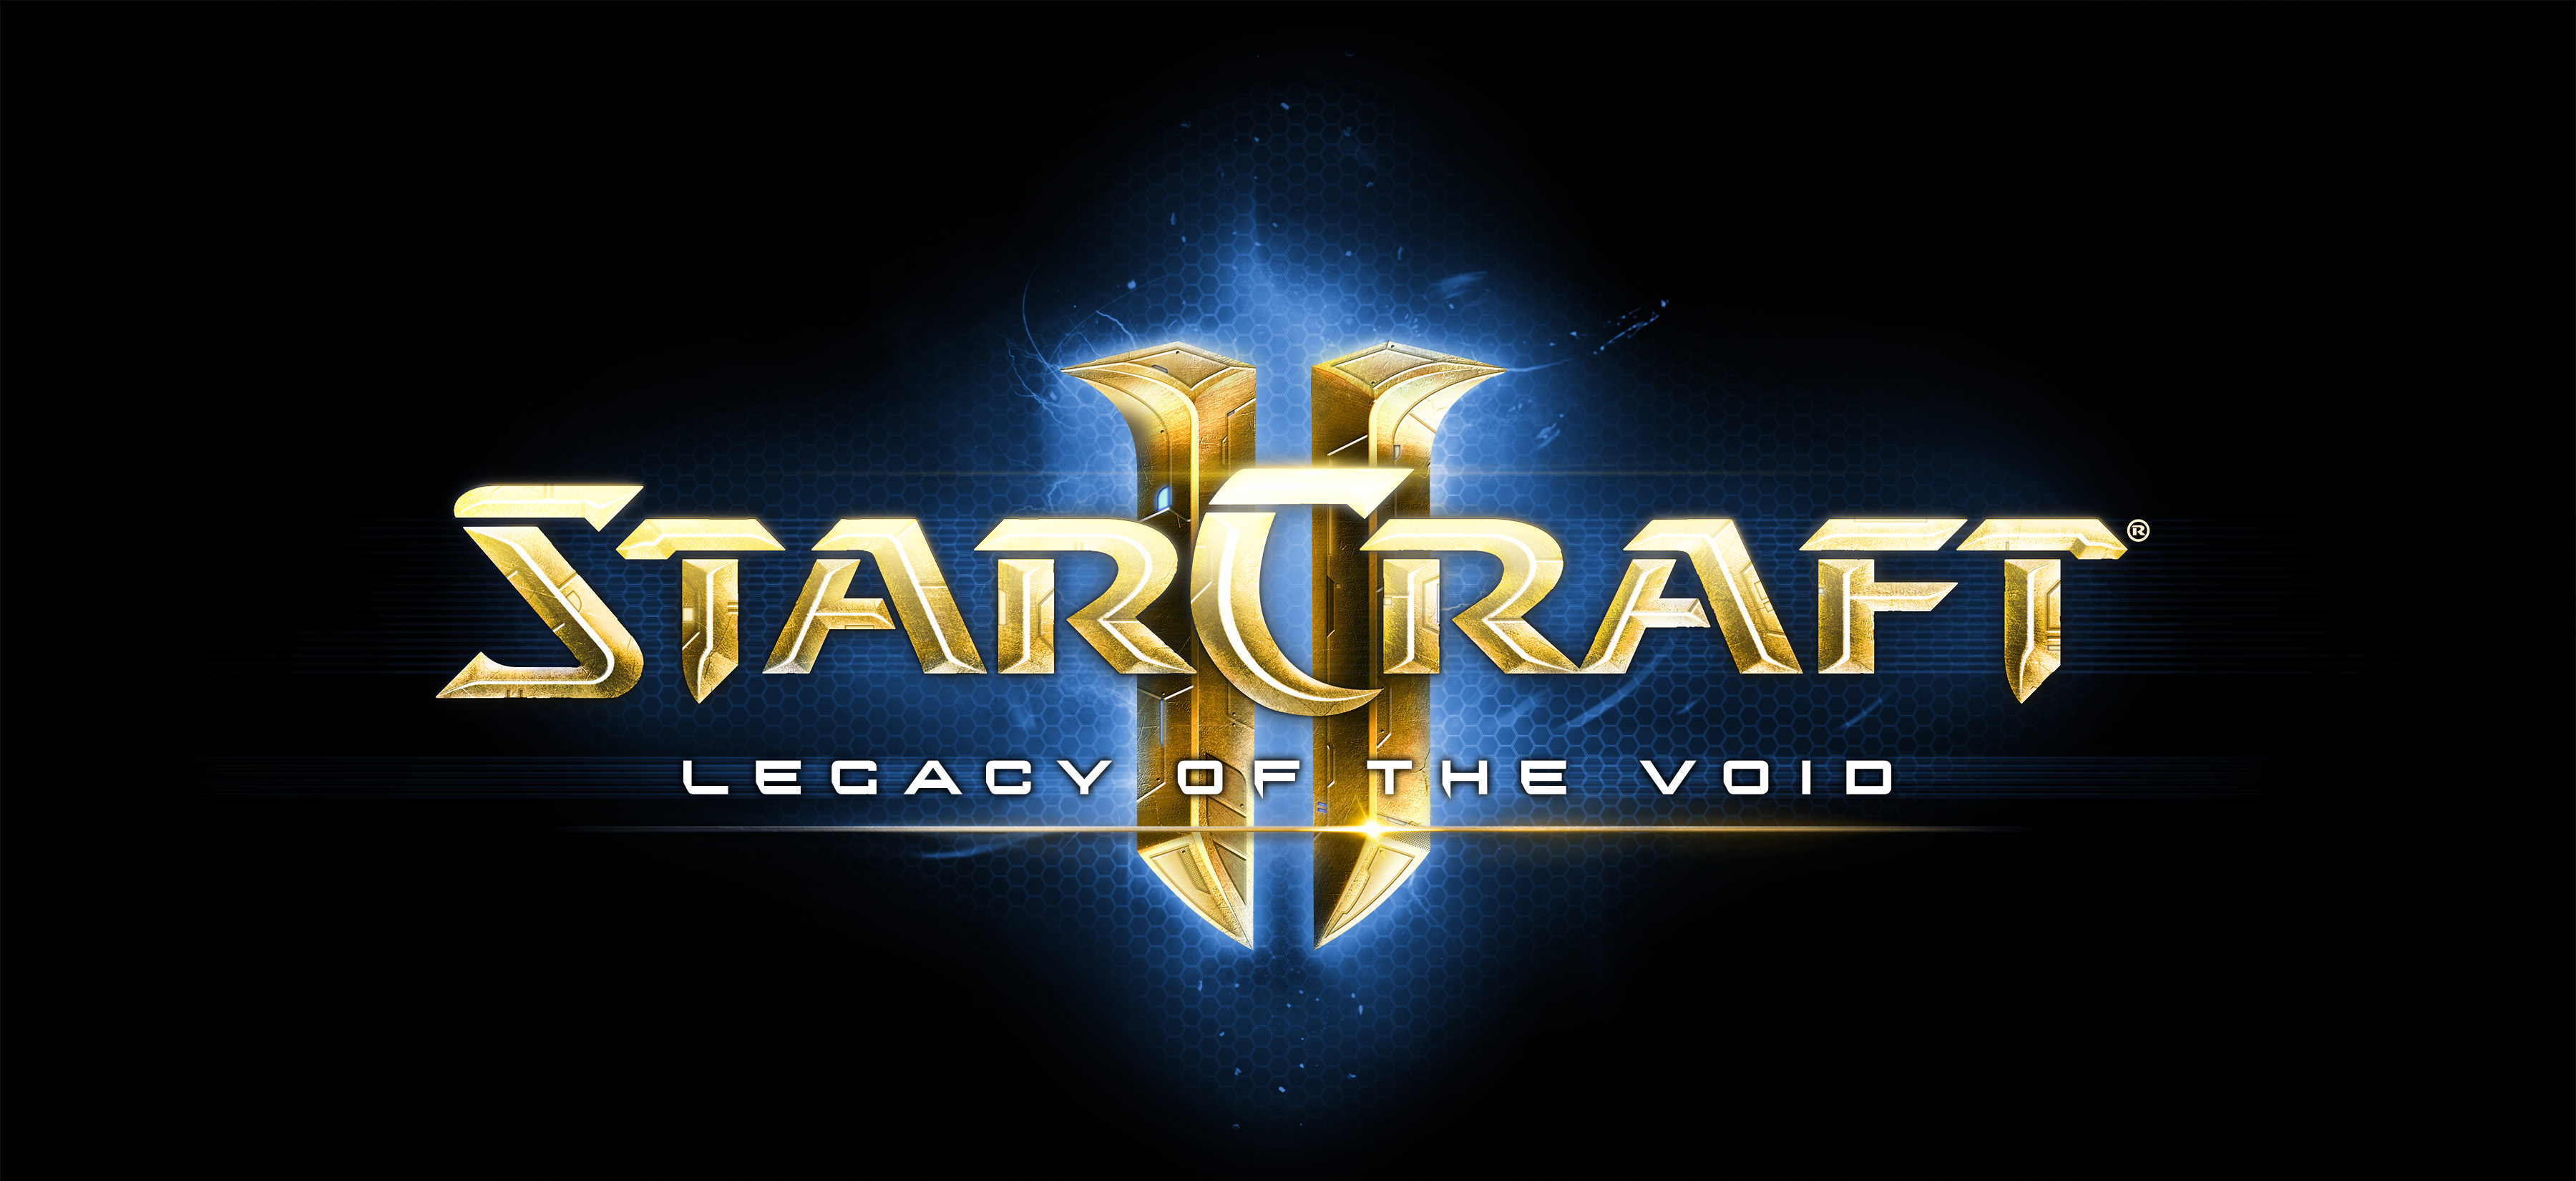 Starcraft 2 Legacy Of The Void Wallpapers Pictures Images